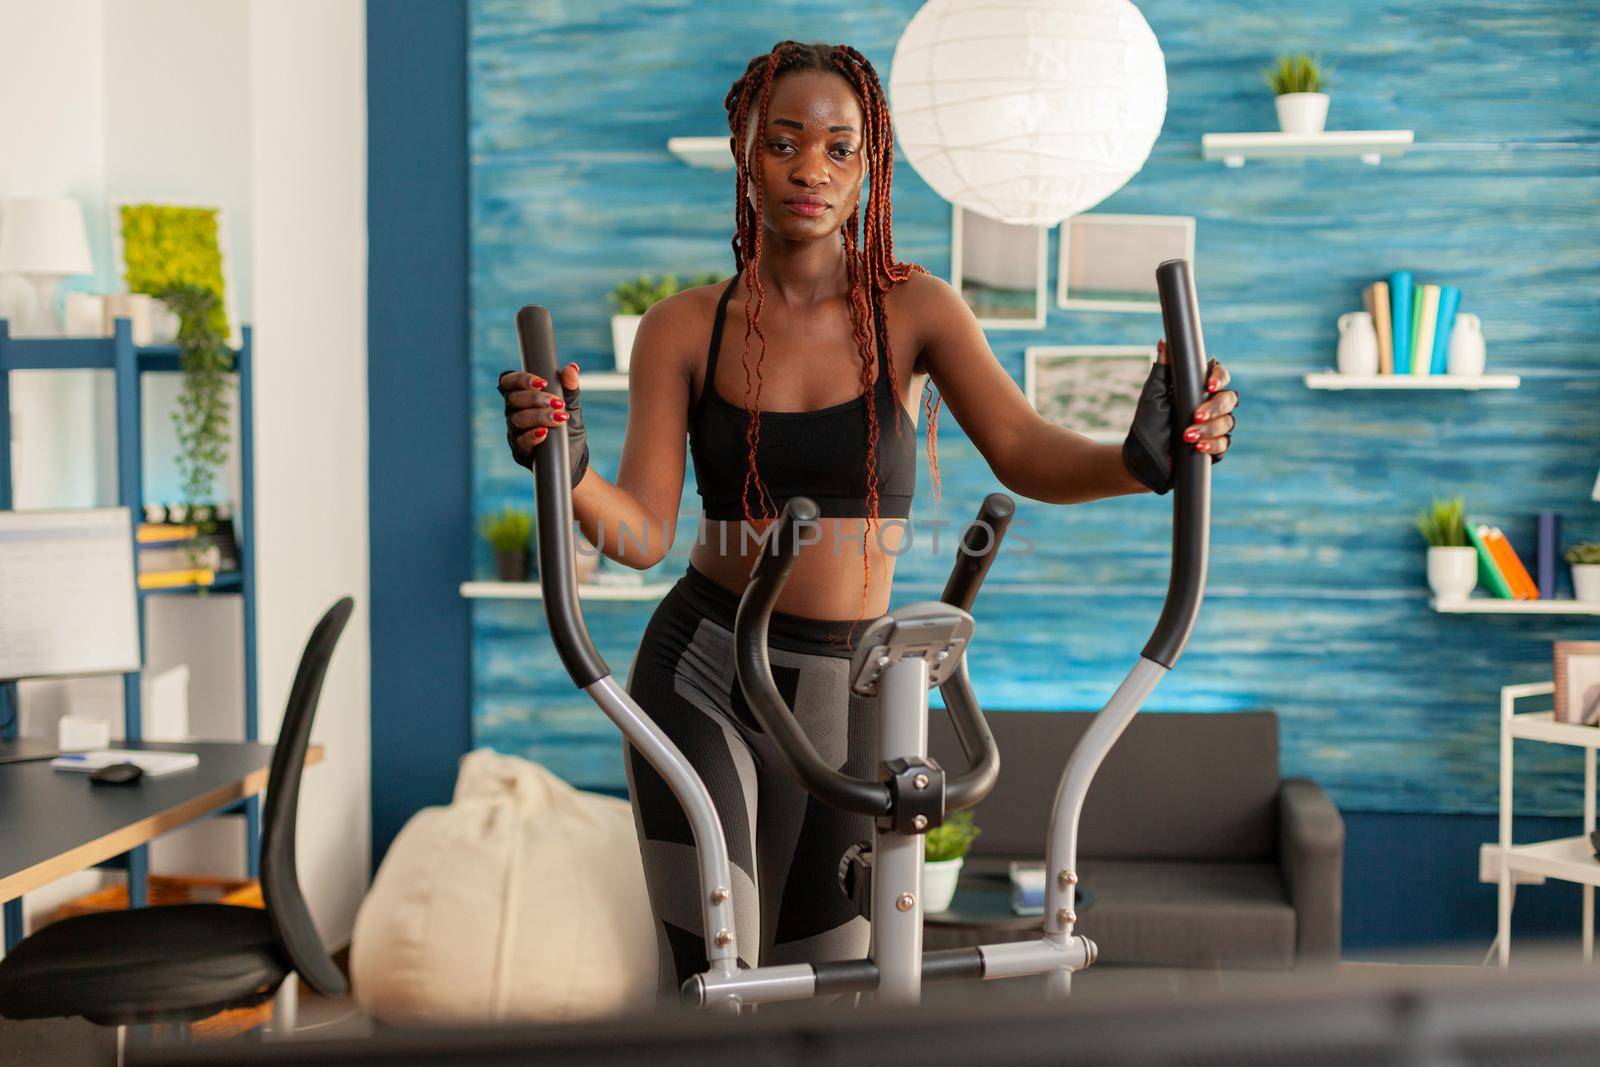 Black person training in home living room using eliptical machine for cross cardio training, watching online exercising. Sporty strong active woman with healthy lifestyle.